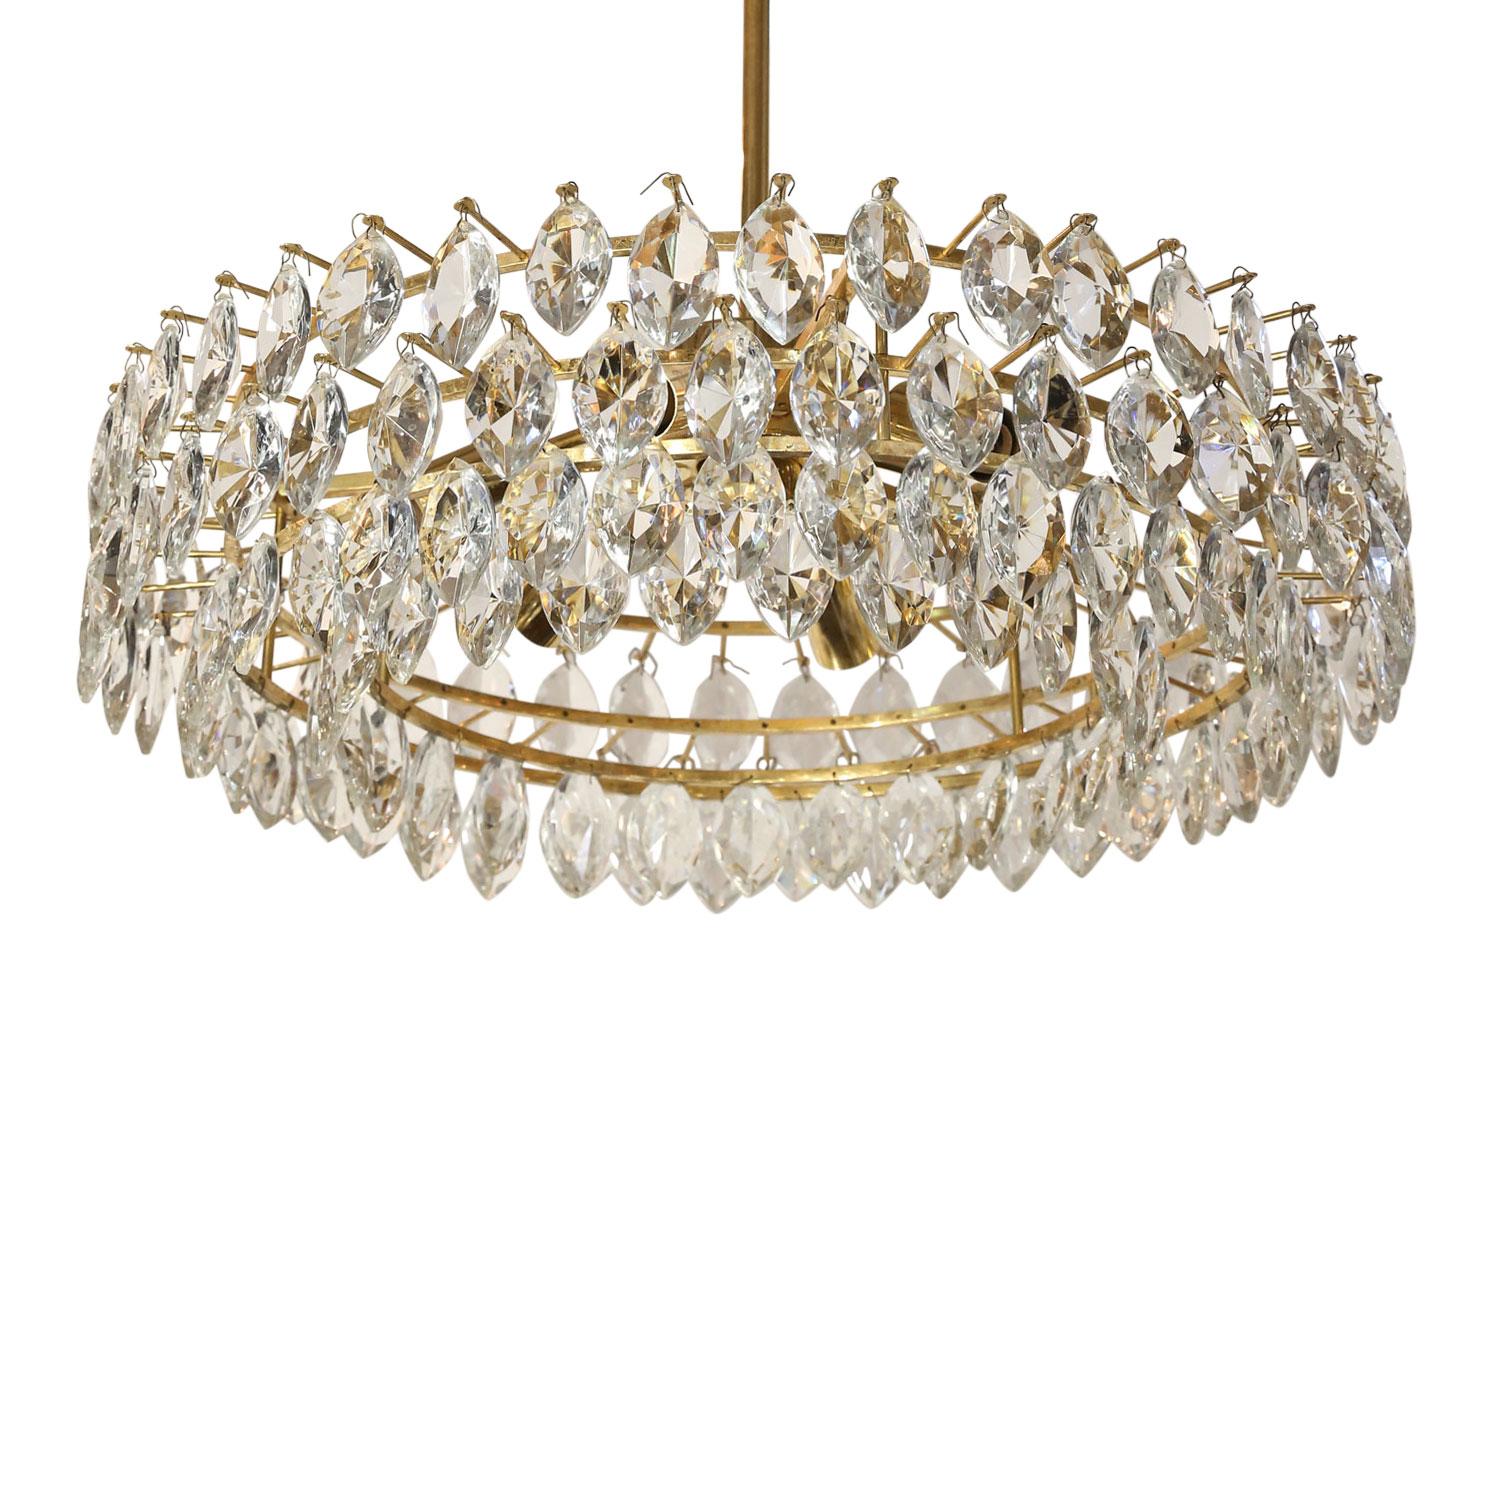 Vintage Austrian Palwa crystal chandelier, circa 1940s-1950s. Newly wired for use within the USA using all UL listed parts. Accommodates six candelabra-size bulb lights. Includes chain and a canopy (listed height does not include chain and canopy).